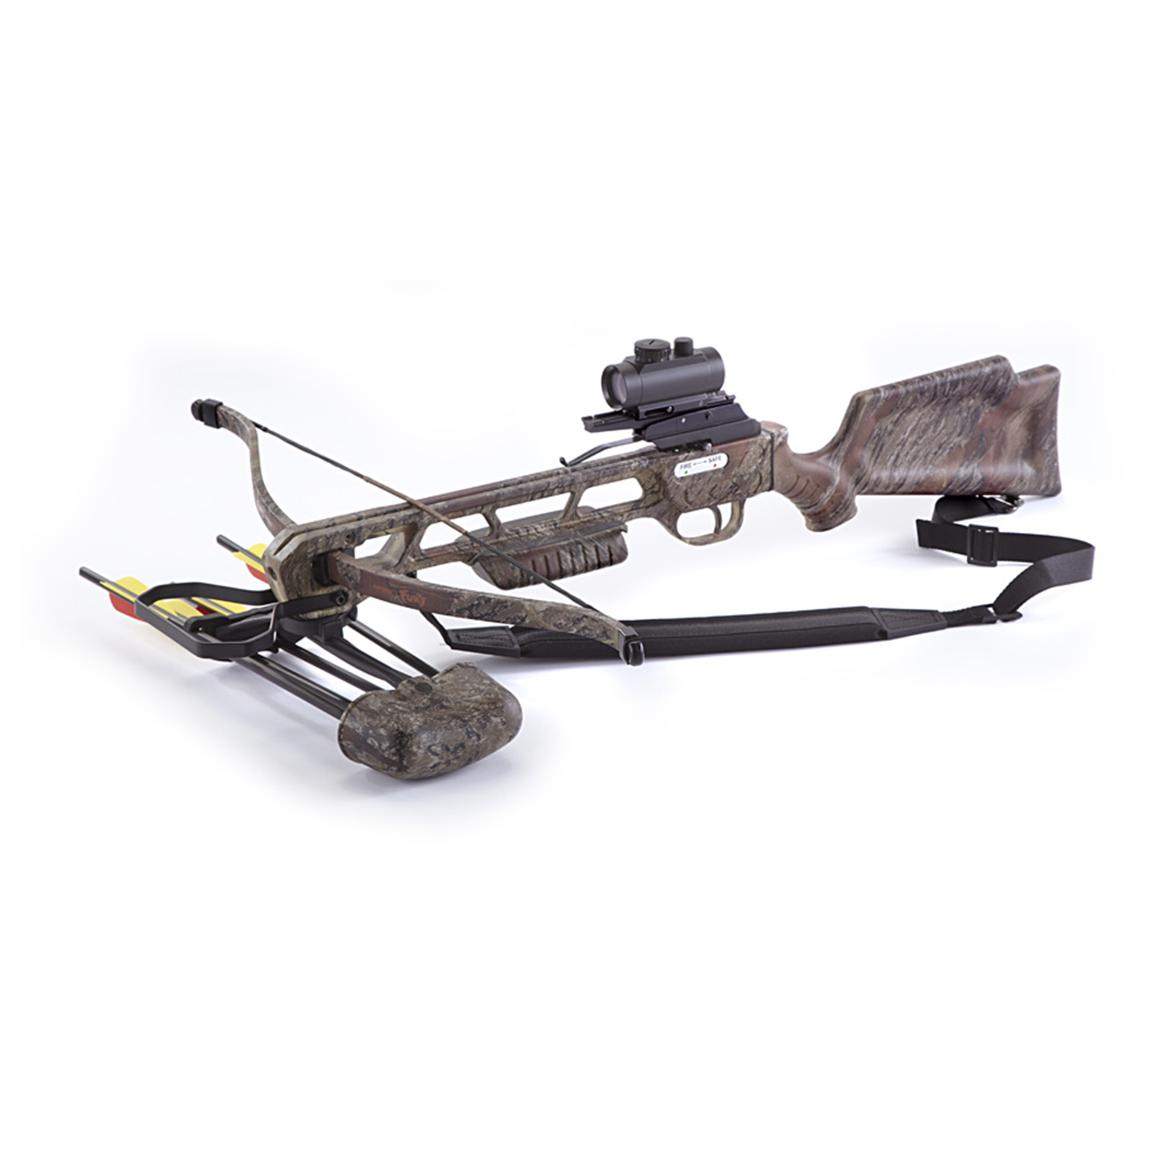 Arrow Precision® Inferno Fury II Recurve Crossbow Package with Rope Cocker